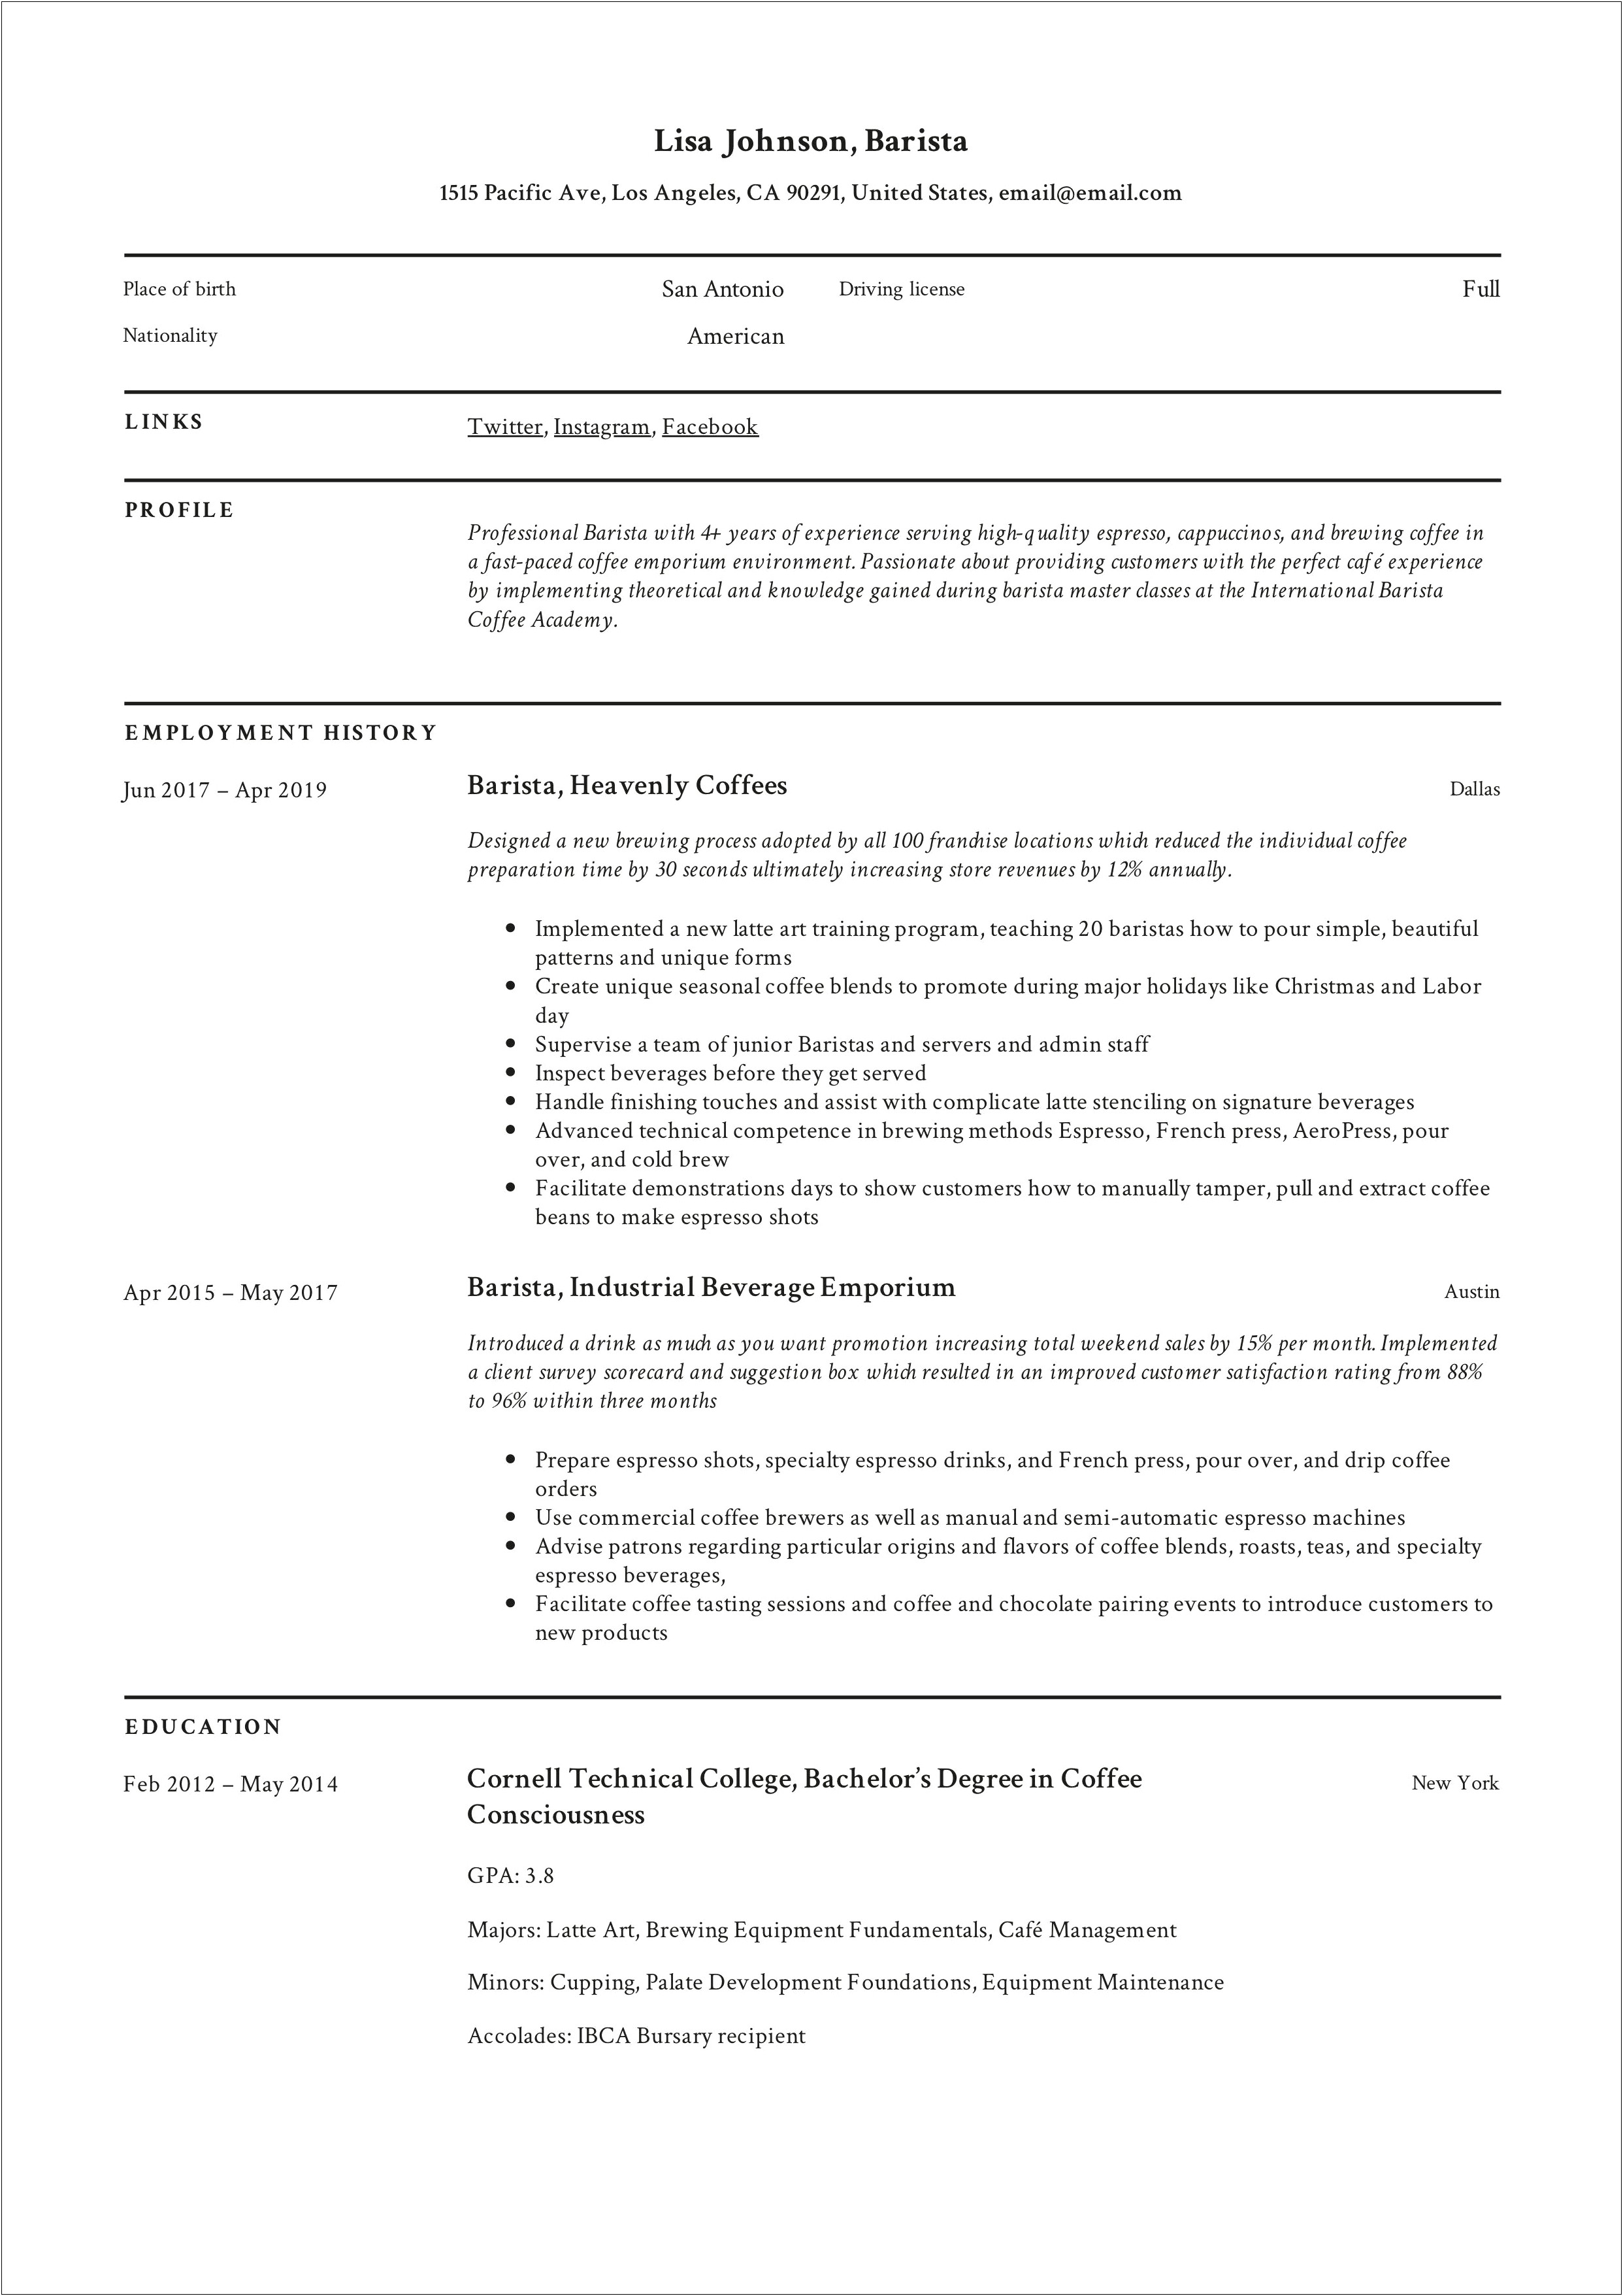 Sample Resume For Coffee Shop Worker